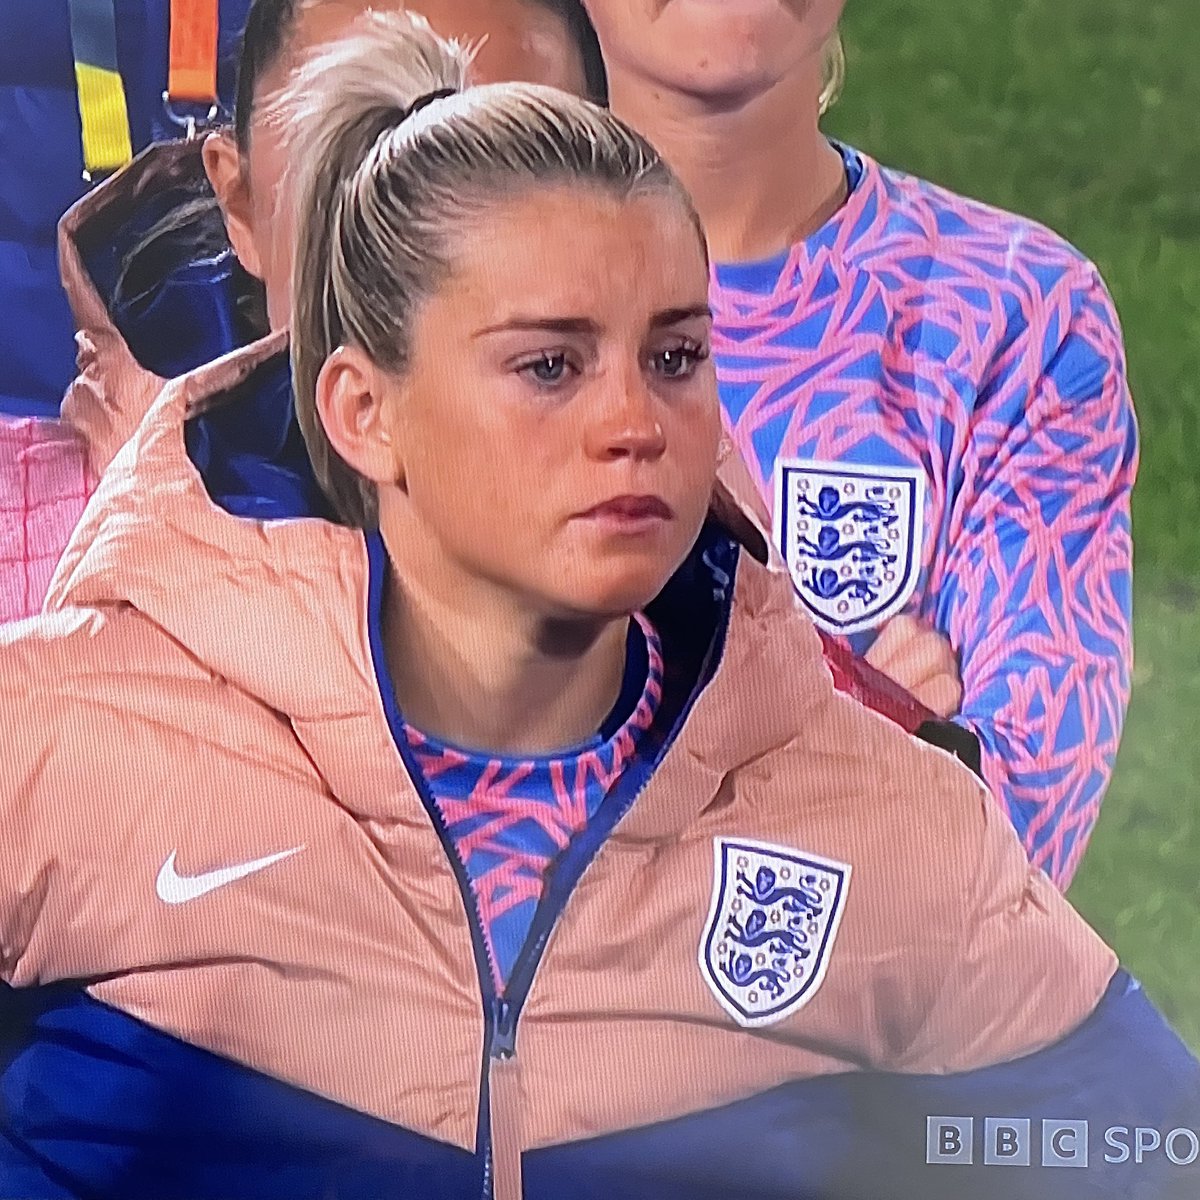 Alessia Russo, still breathtaking even with tears in her eyes ♥️🏴󠁧󠁢󠁥󠁮󠁧󠁿

#ESPENG #WomensWorldCup2023